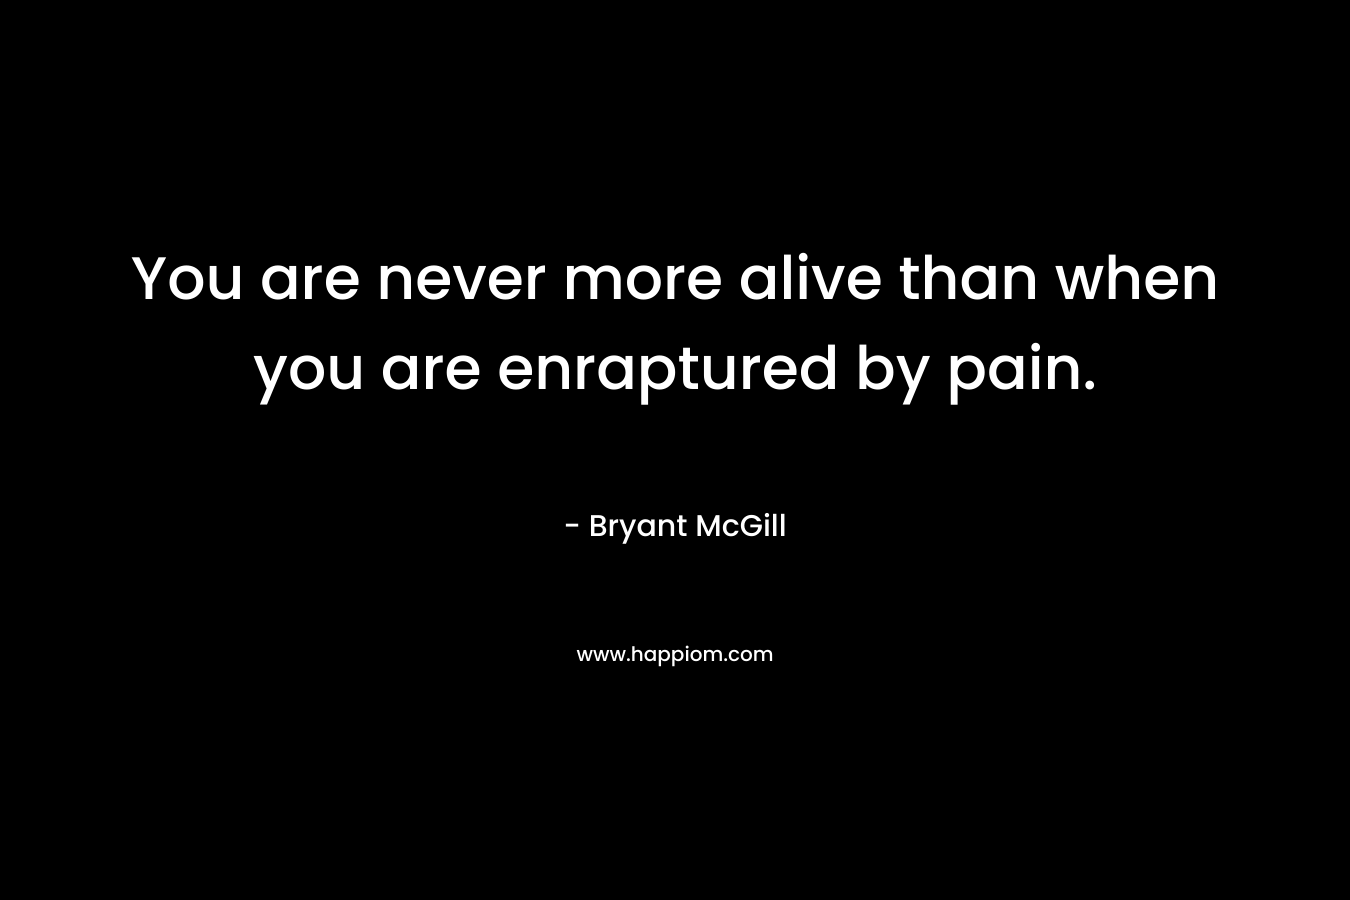 You are never more alive than when you are enraptured by pain.